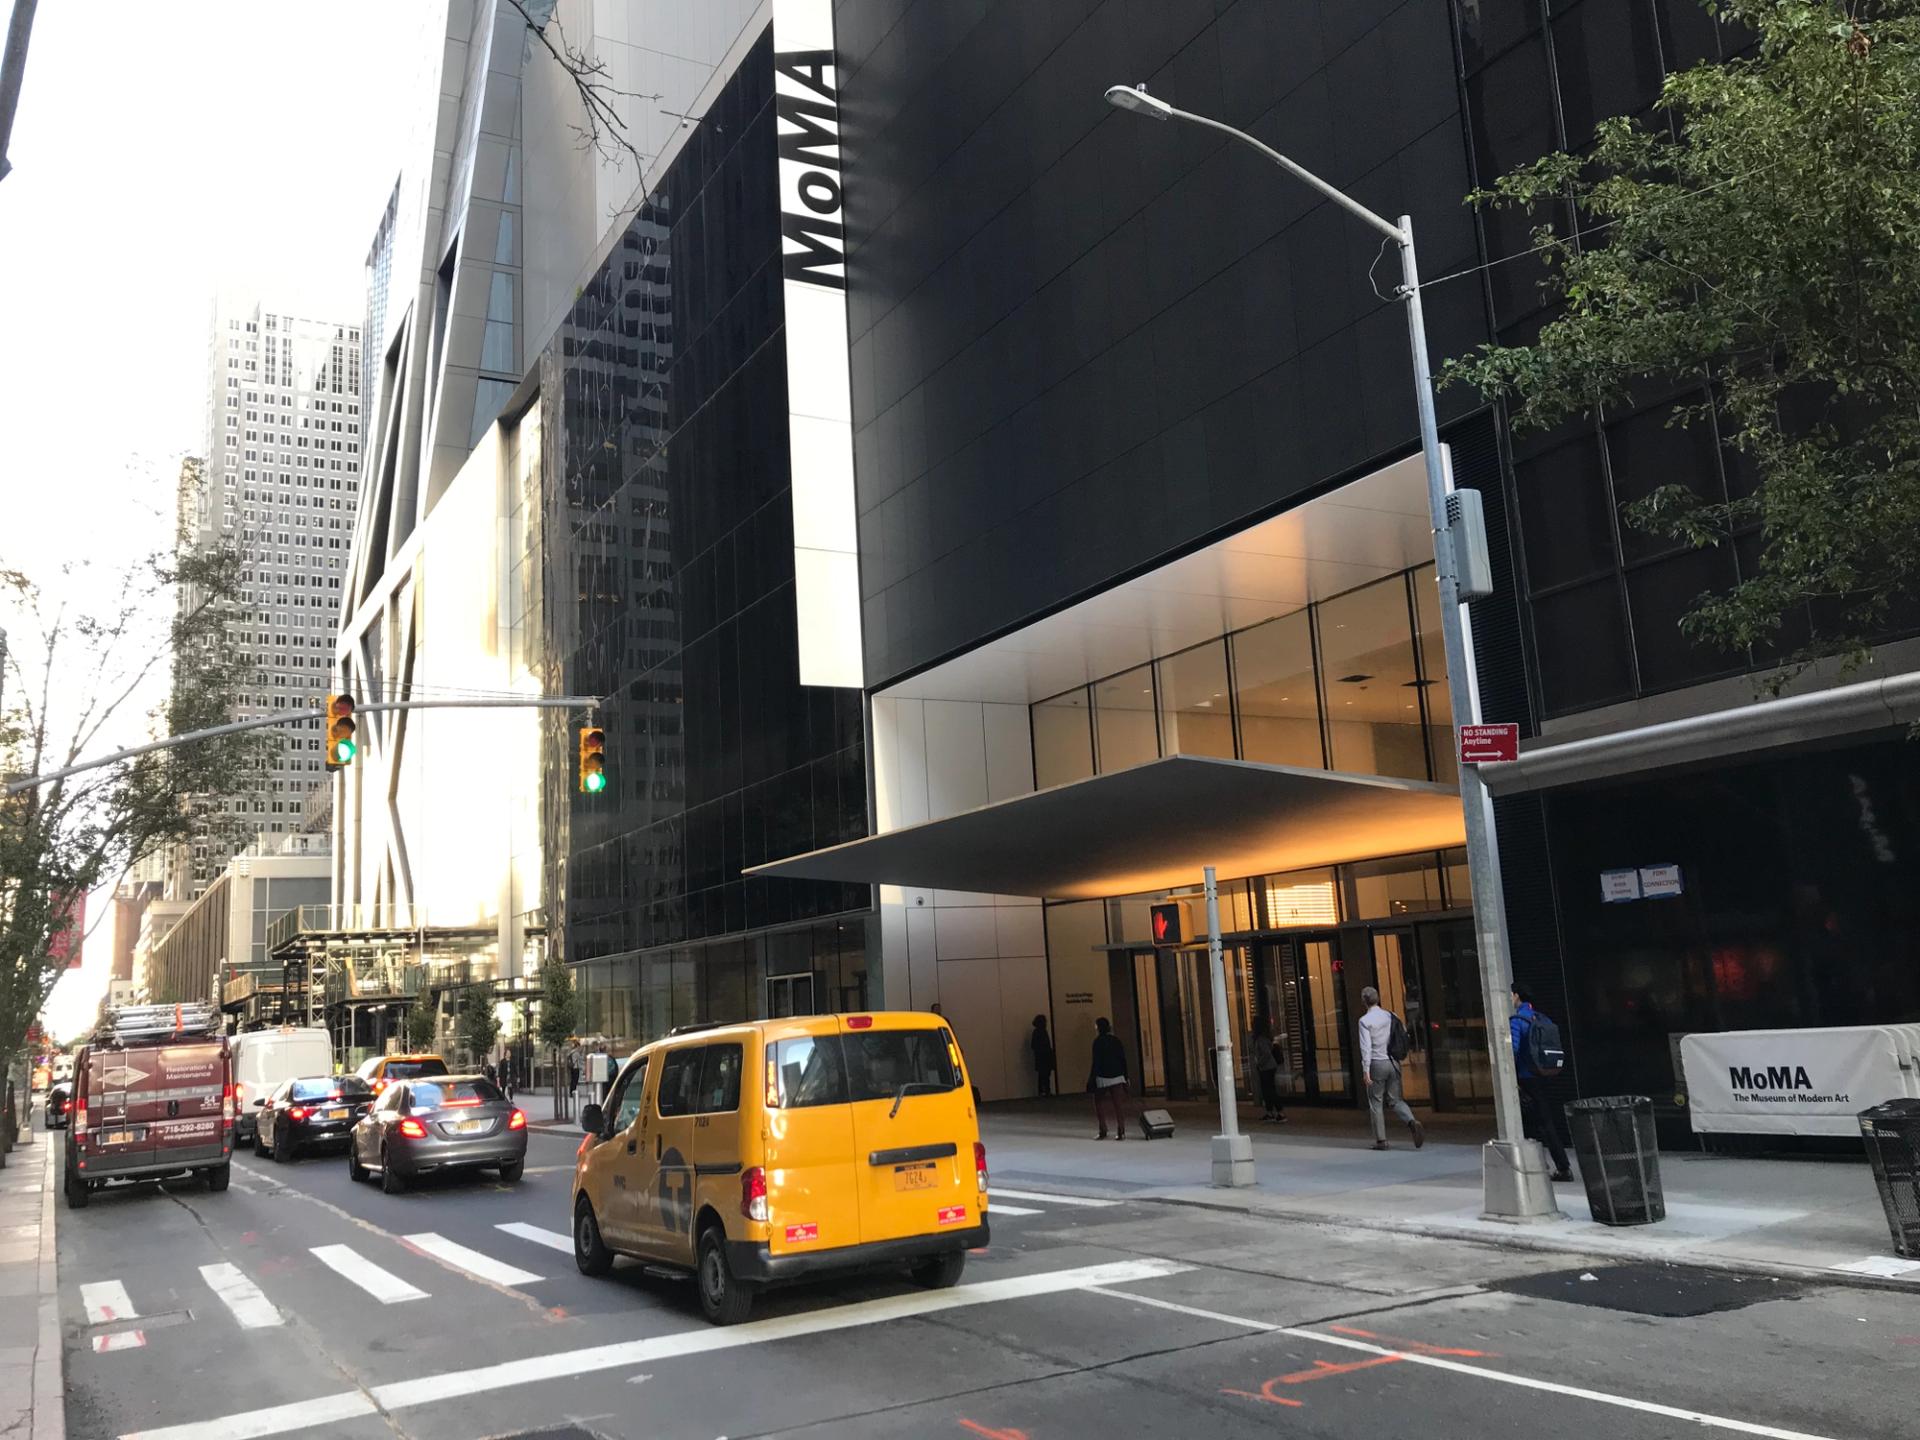 glemme Turbine Høj eksponering Art history isn't the neat package you think it is': first look at MoMA's  $450m expansion